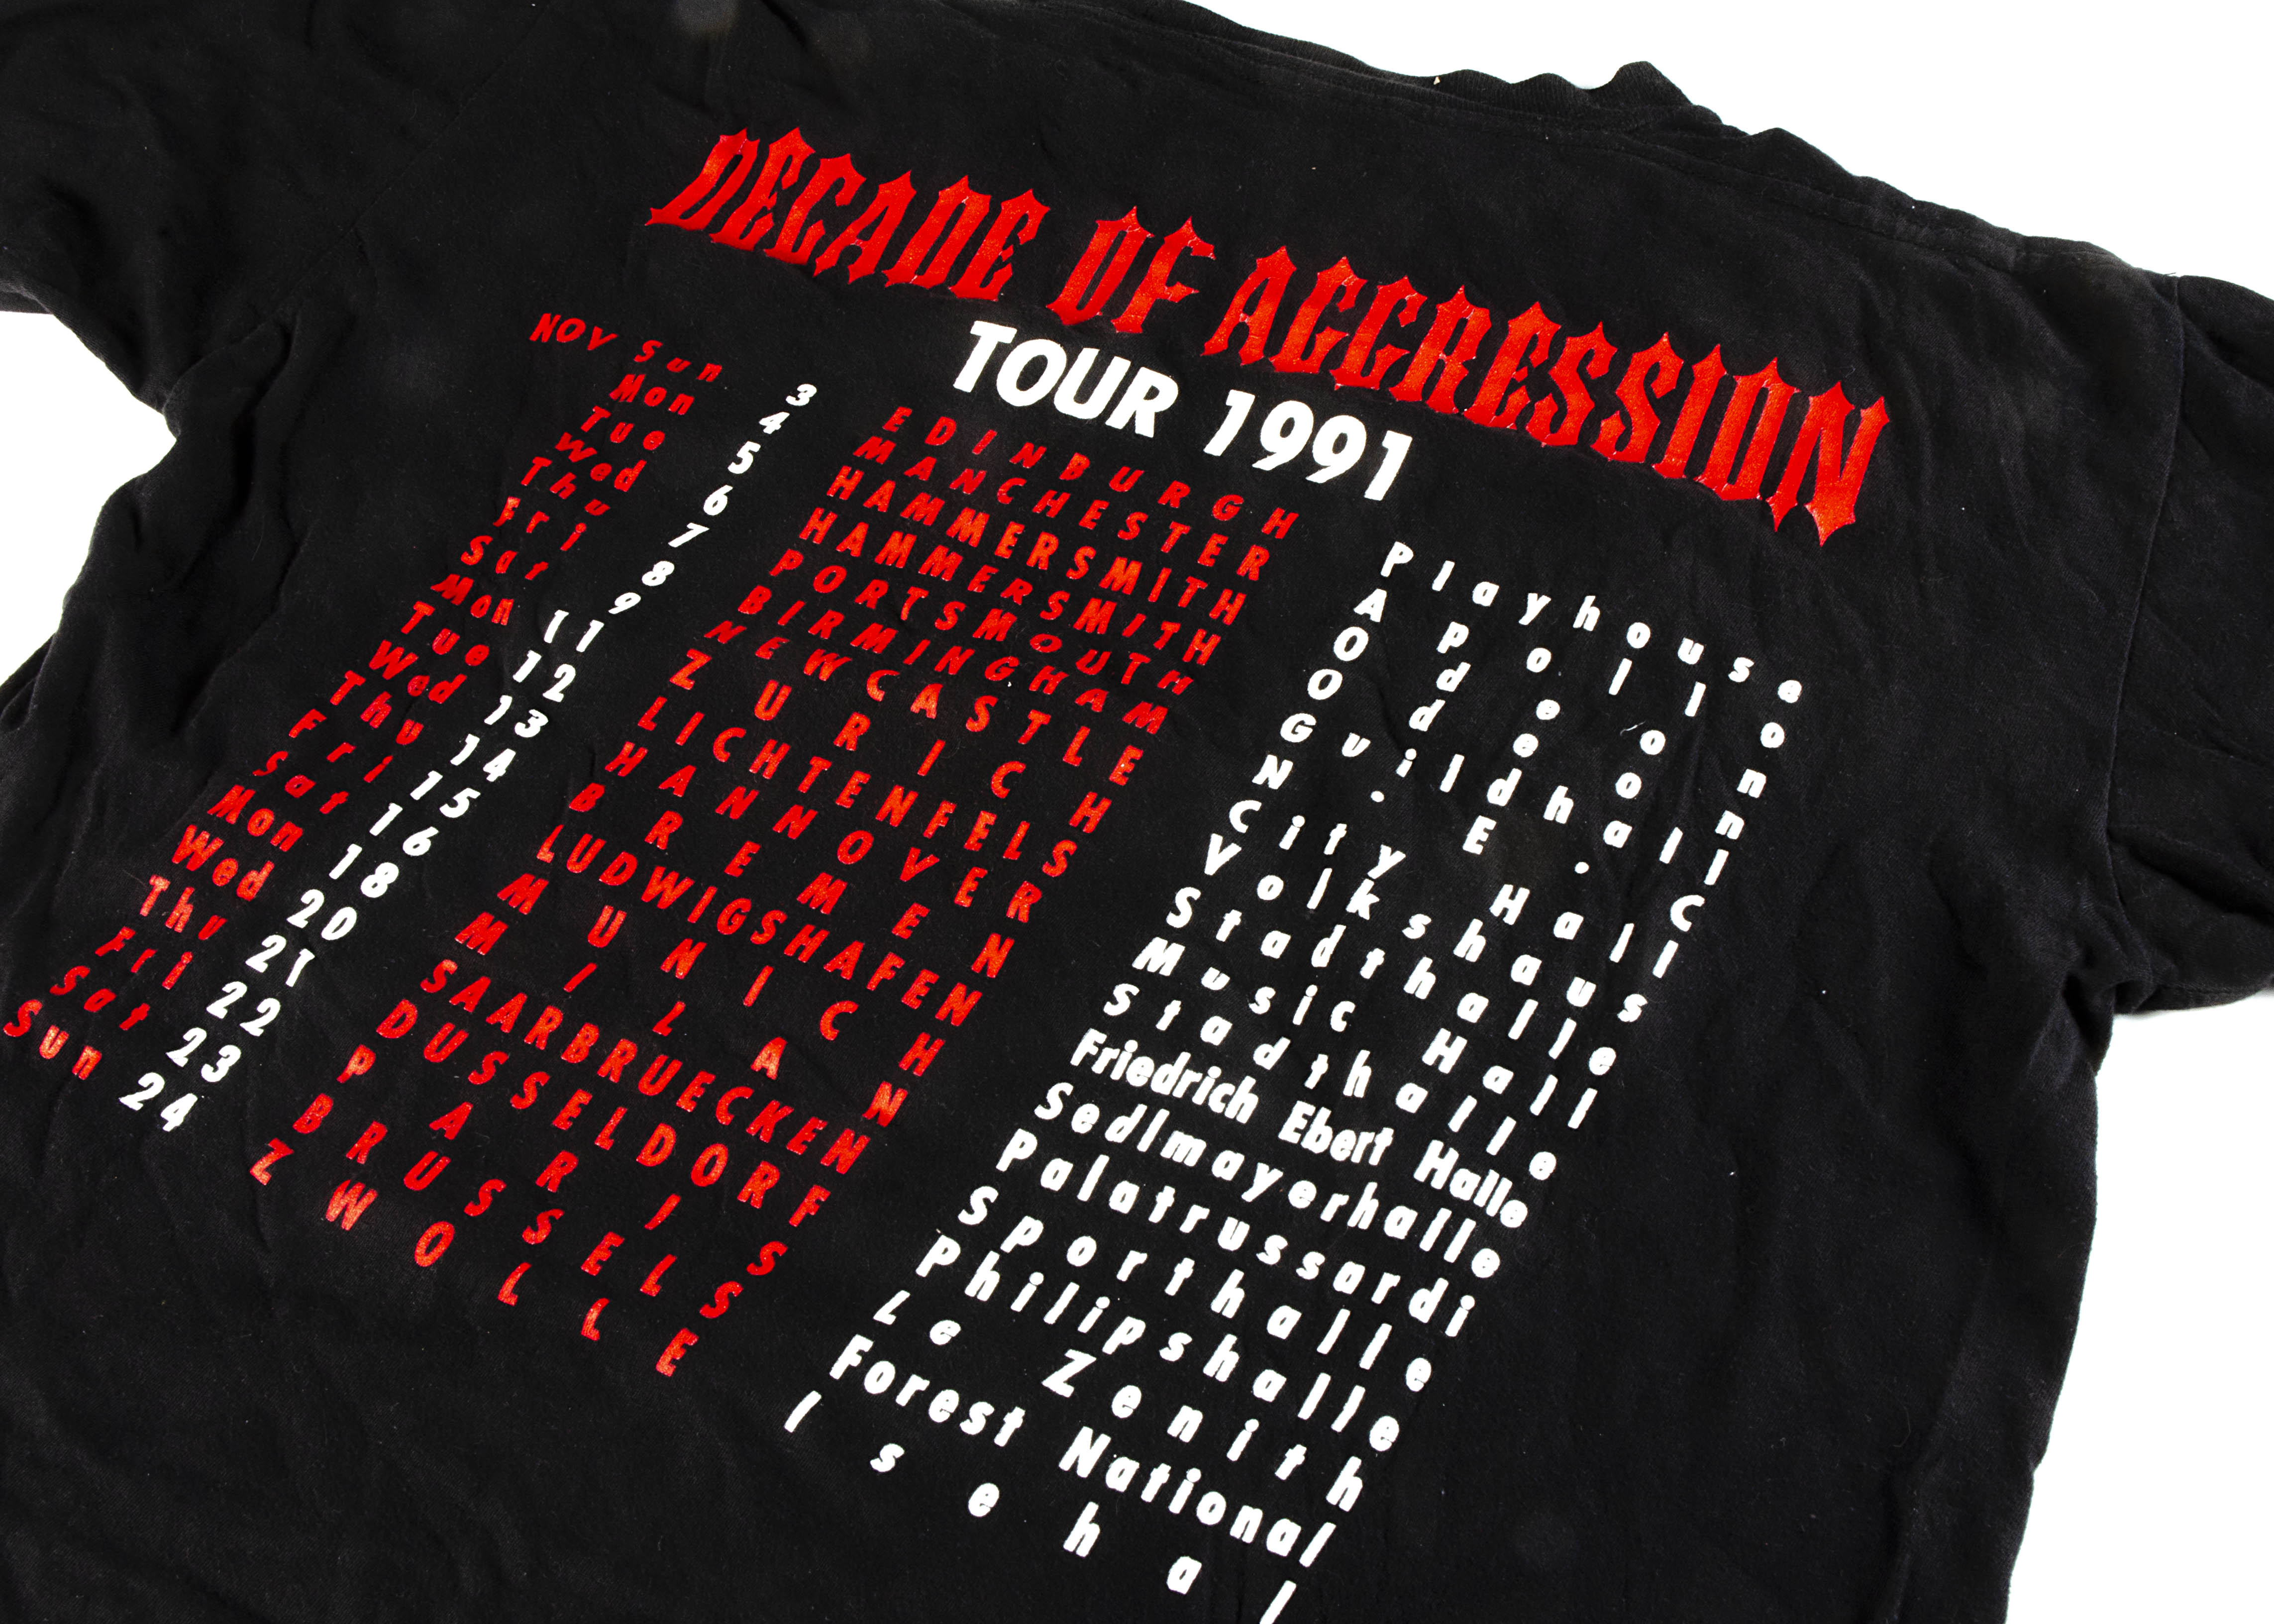 Slayer 'T' Shirt, Decade of Aggression 1991 tour 'T' shirt, image on front and dates on reverse - Image 2 of 2